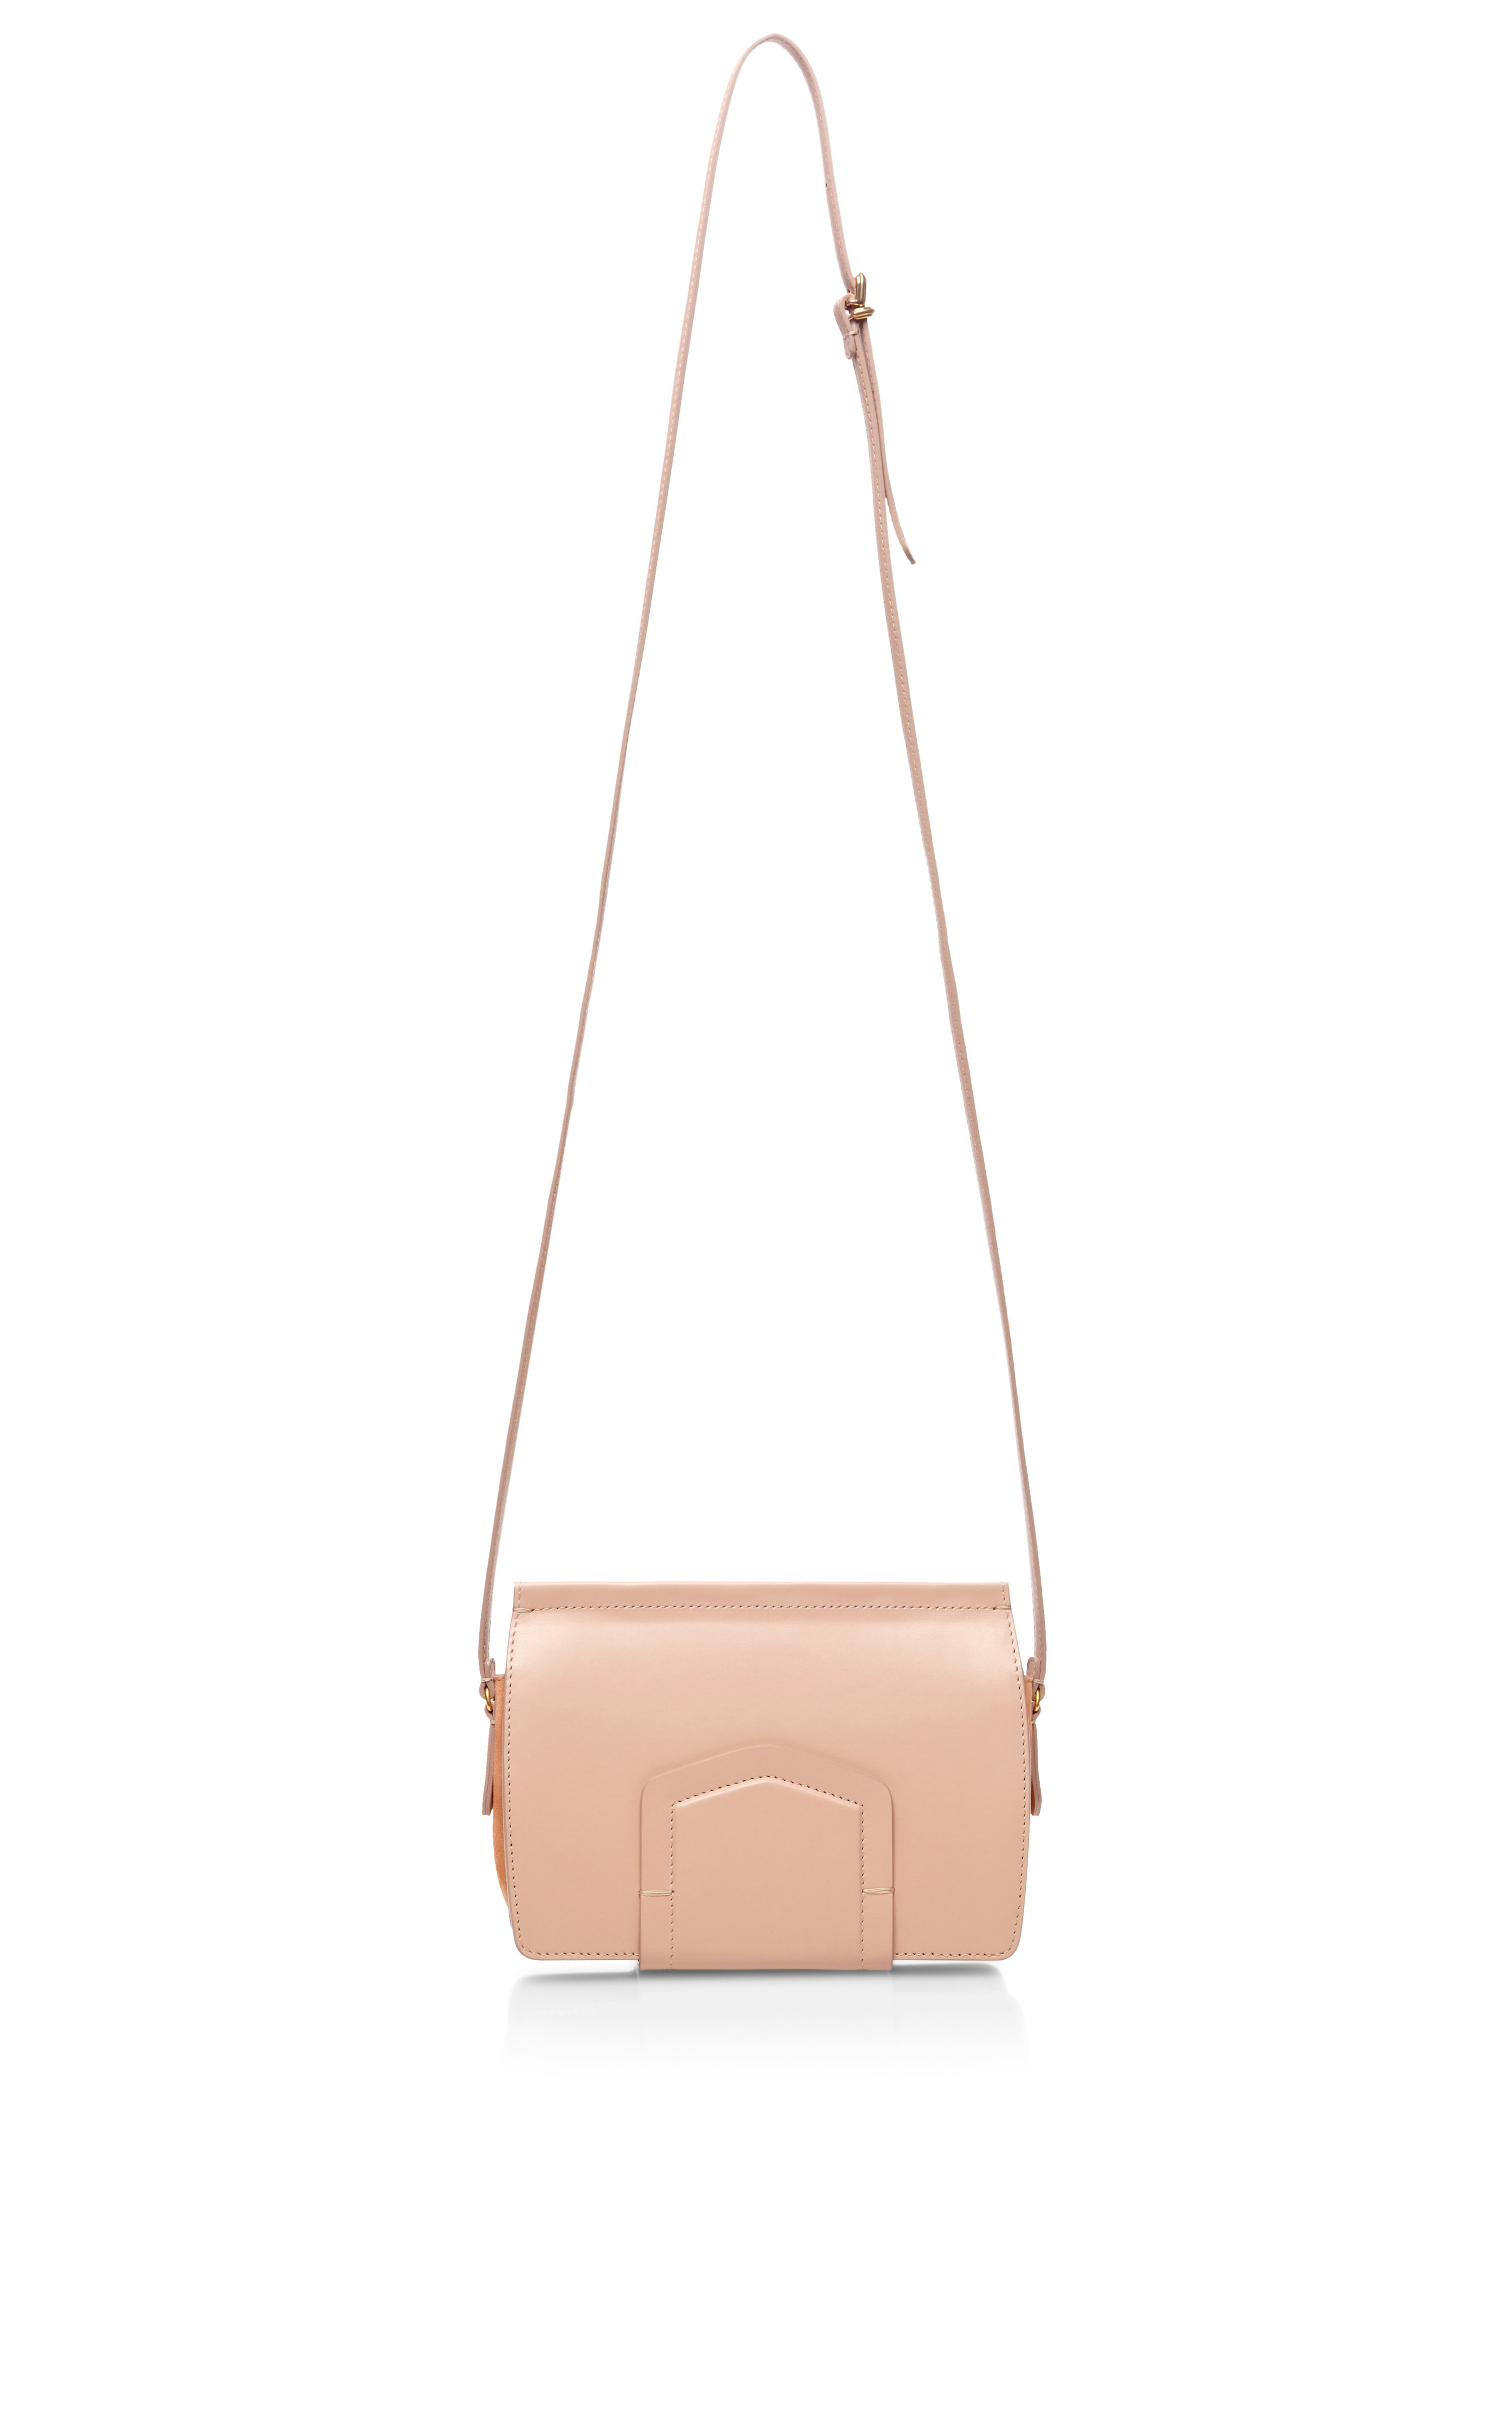 Nina Ricci Folded Case Leather and Suede Shoulder Bag in Pale Peach ...